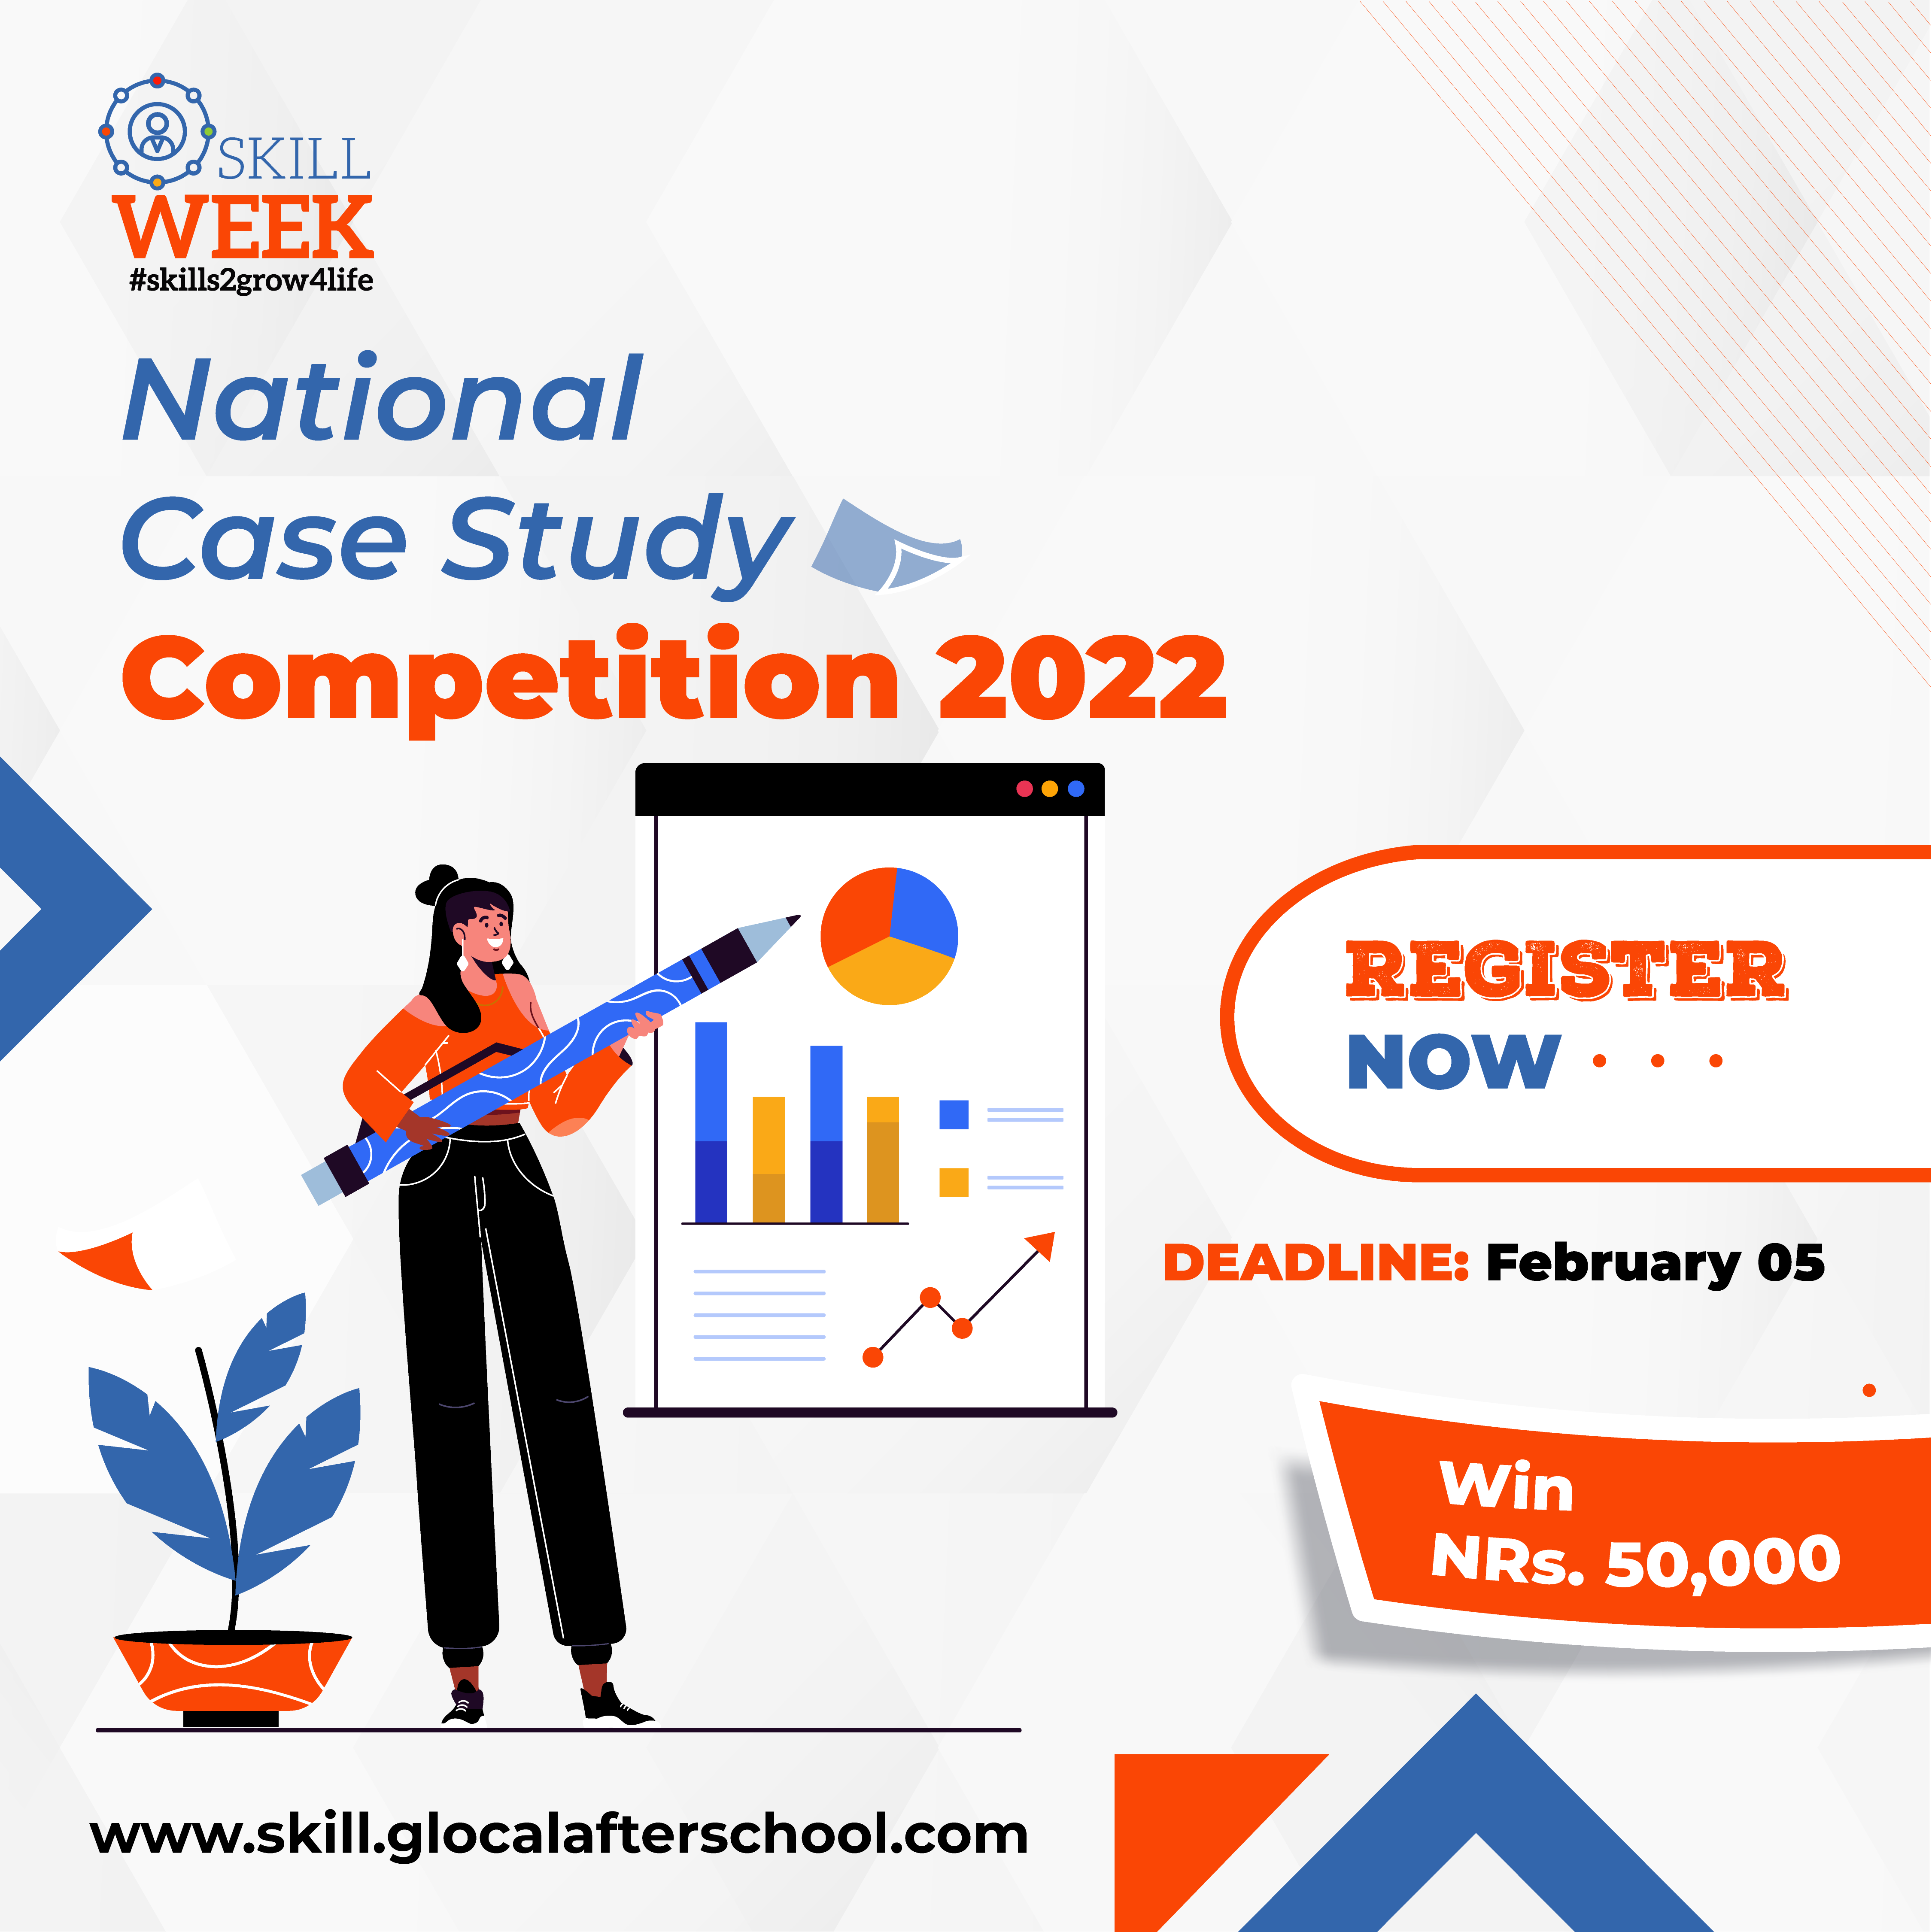 social case study competition